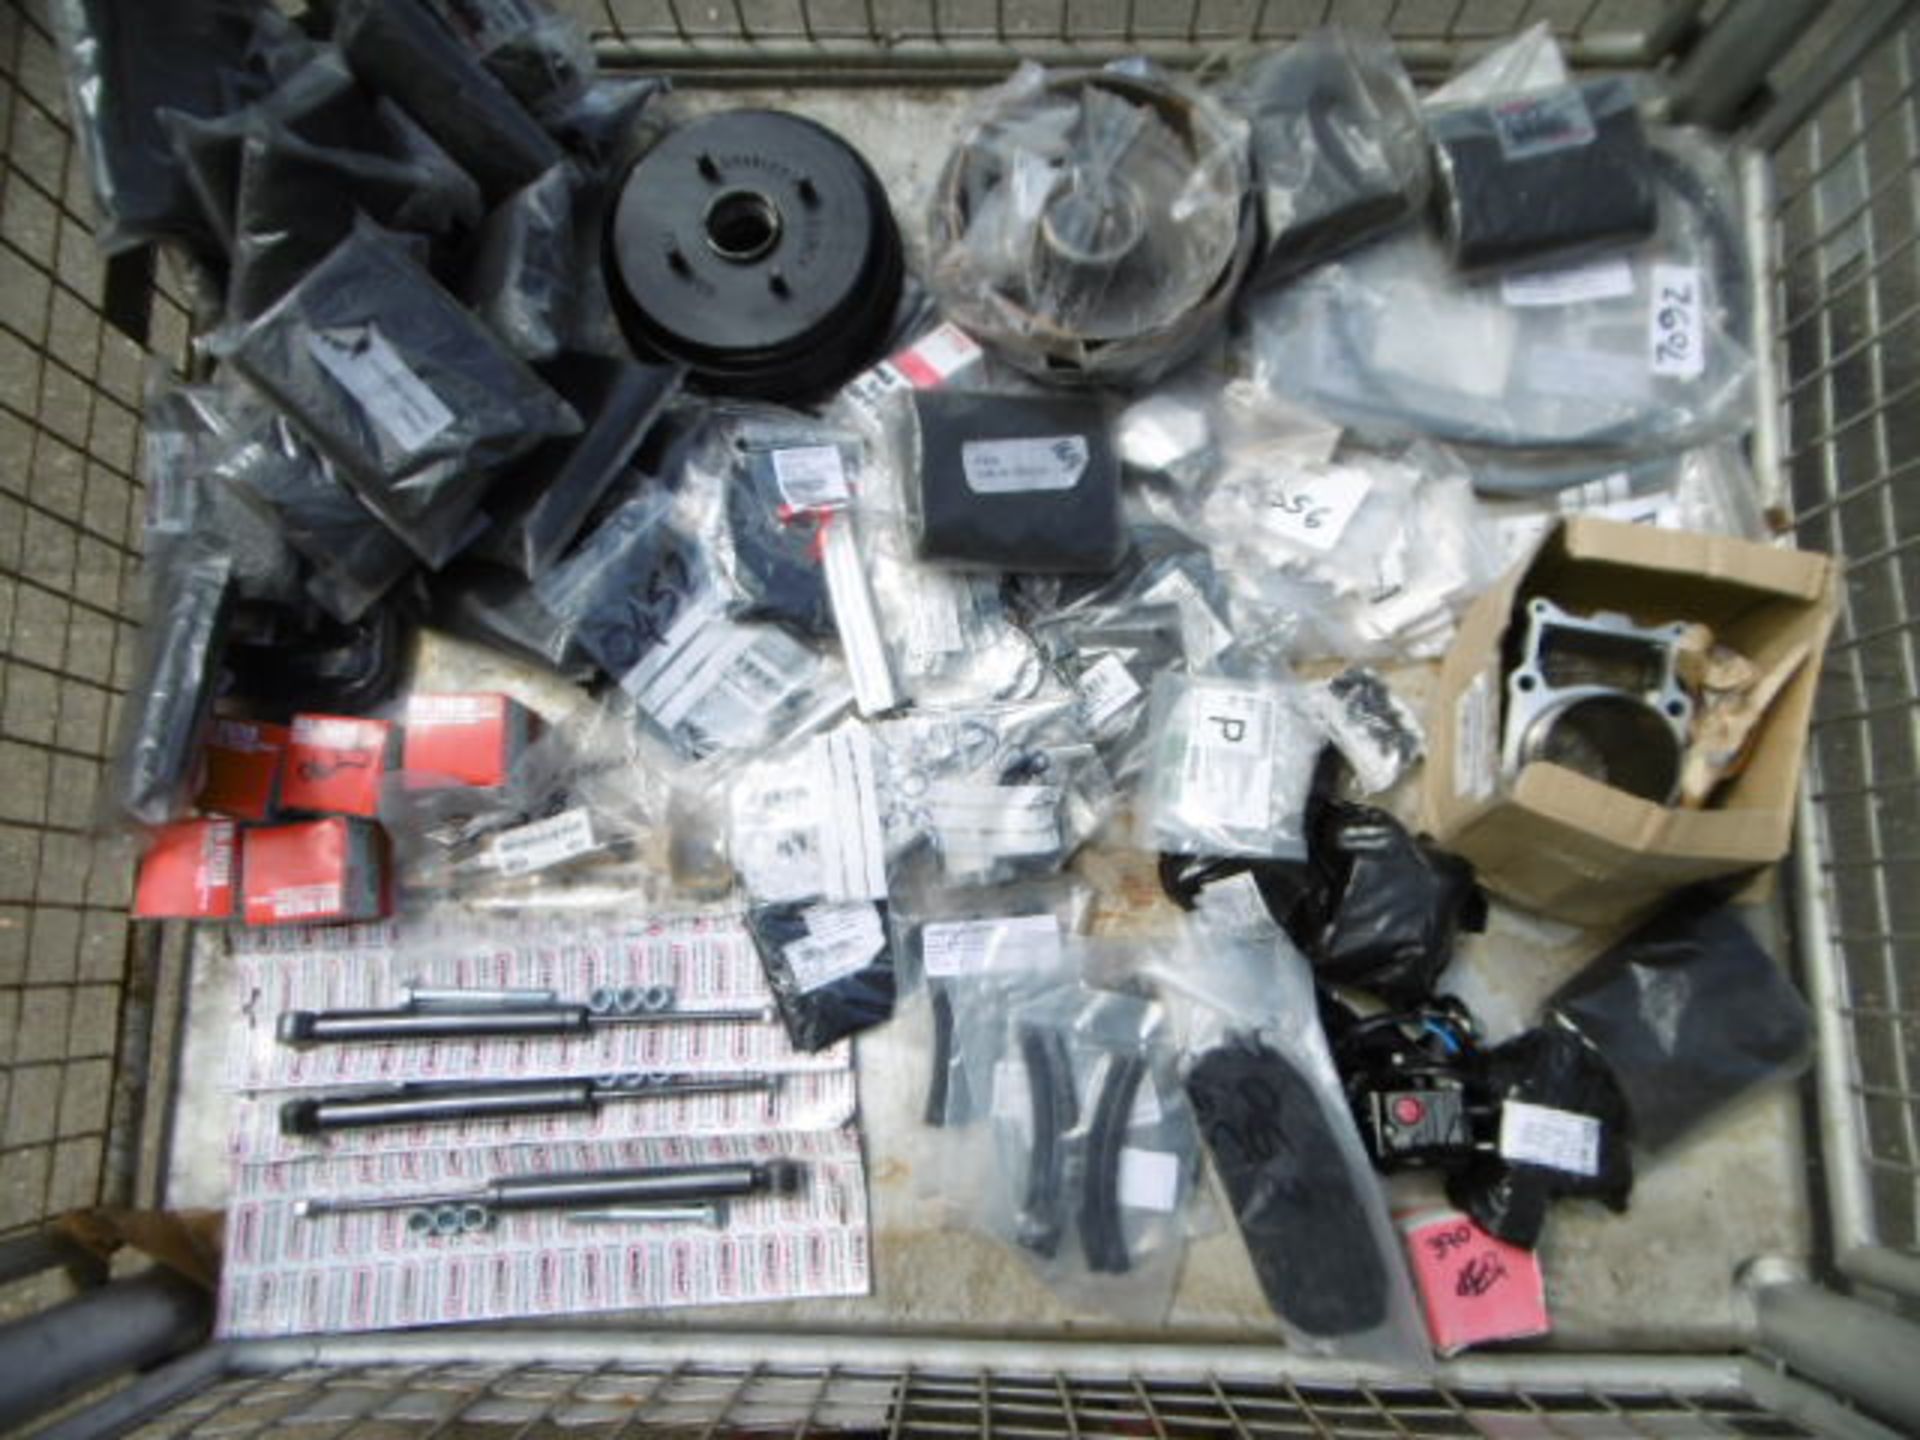 Mixed Stillage of Yamaha Grizzly Spares